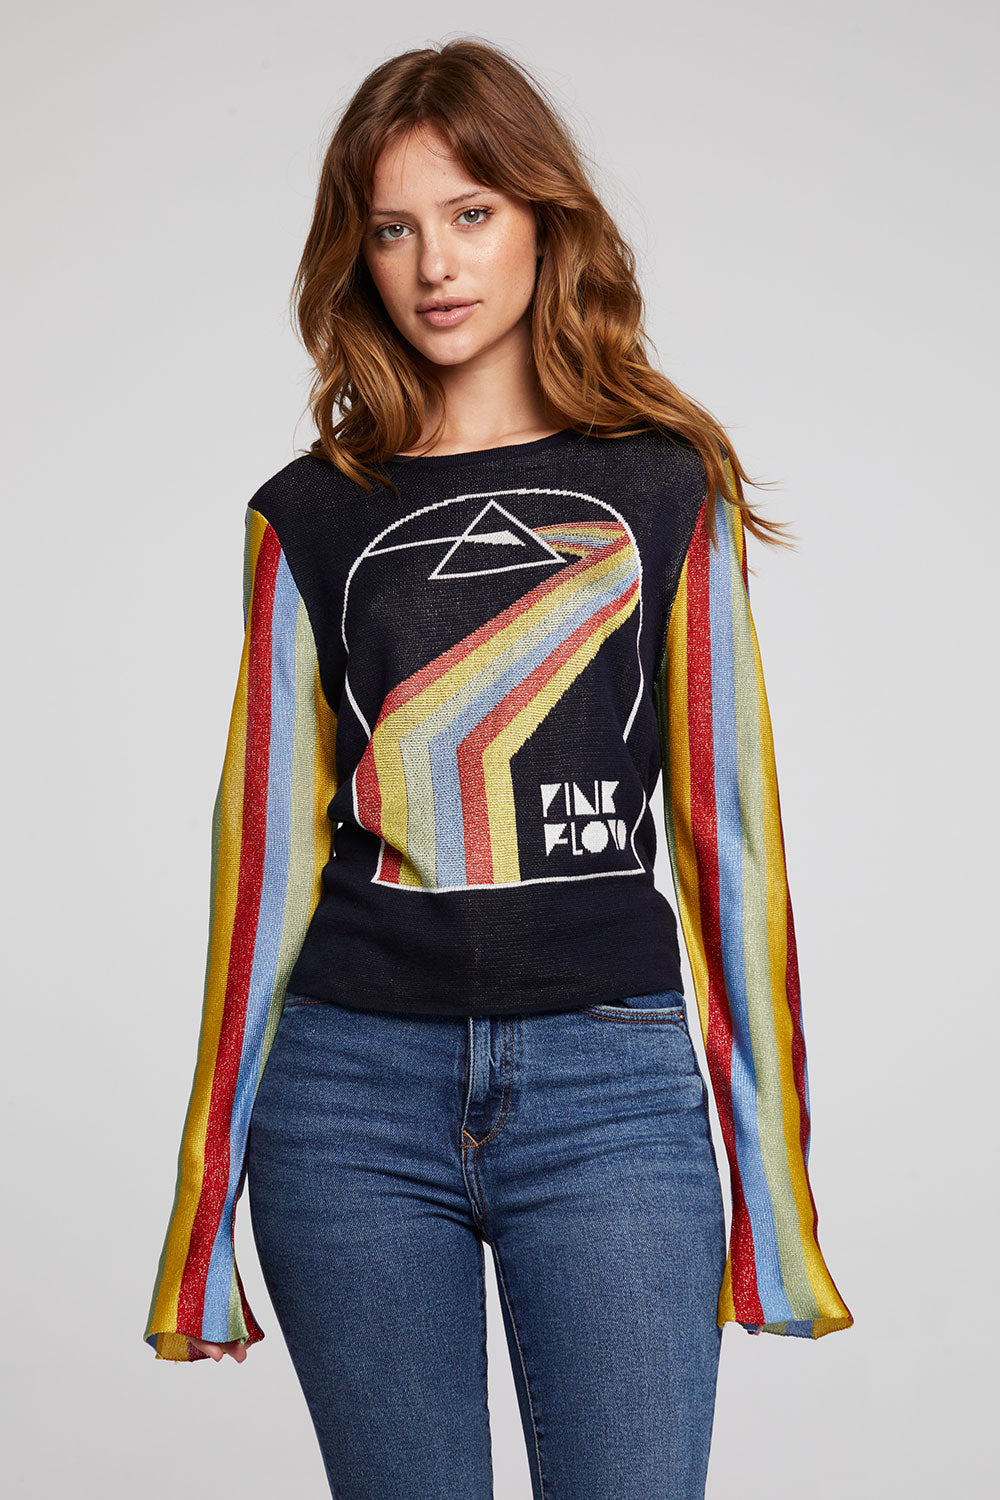 Pink Floyd Prism Sweater WOMENS chaserbrand